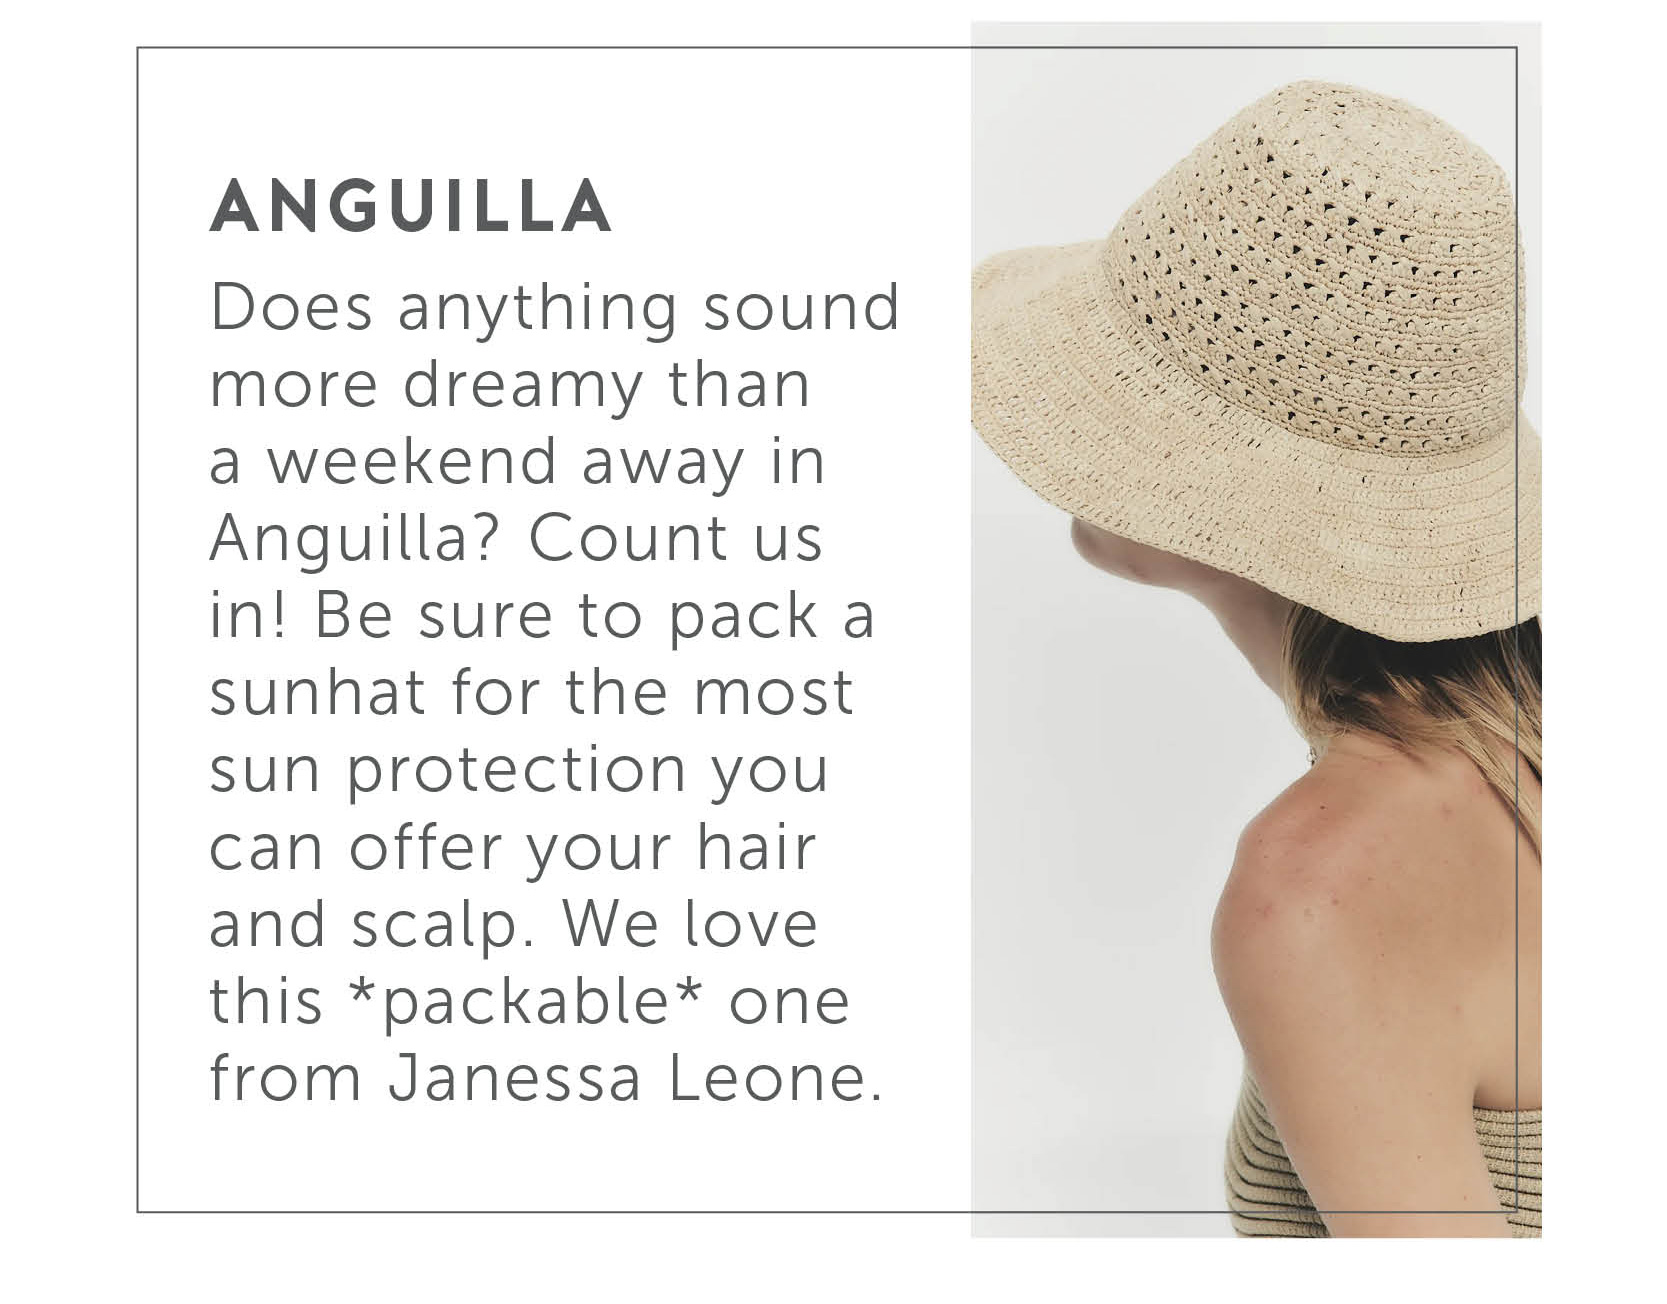 Anguilla - Does anything sound more dreamy than a weekend away in Anguilla? Count us in! Be sure to pack a sunhat for the most sun protection you can offer your hair and scalp. We love this *packable* one from Janessa Leone.